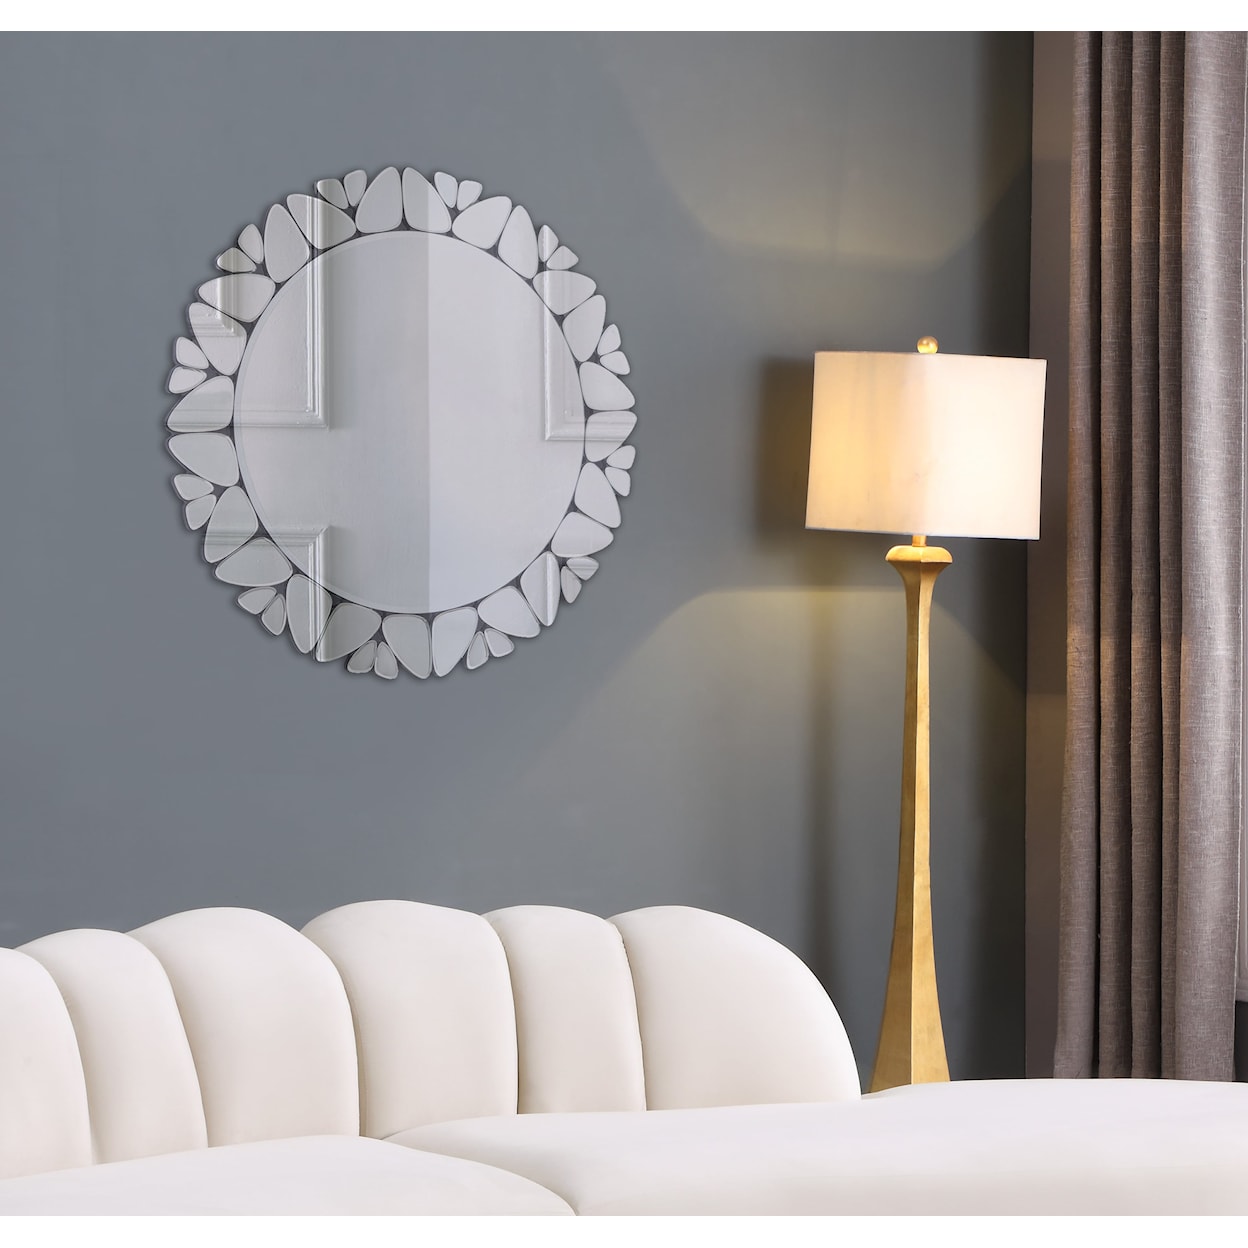 Meridian Furniture Cocoon Round Mirror with Pebbled Trim